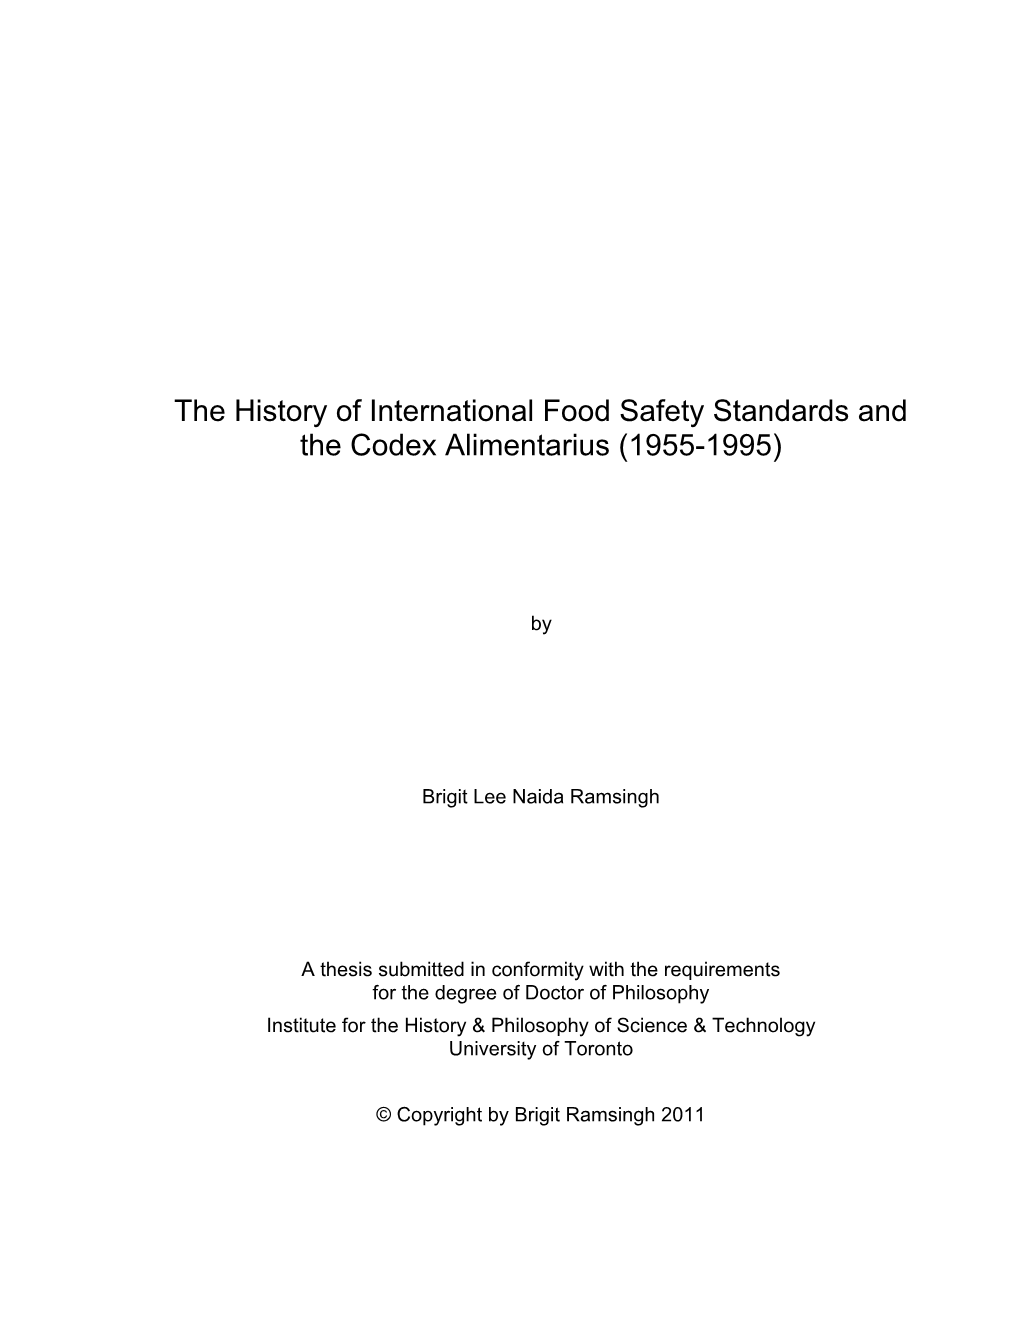 The History of International Food Safety Standards and the Codex Alimentarius (1955-1995)